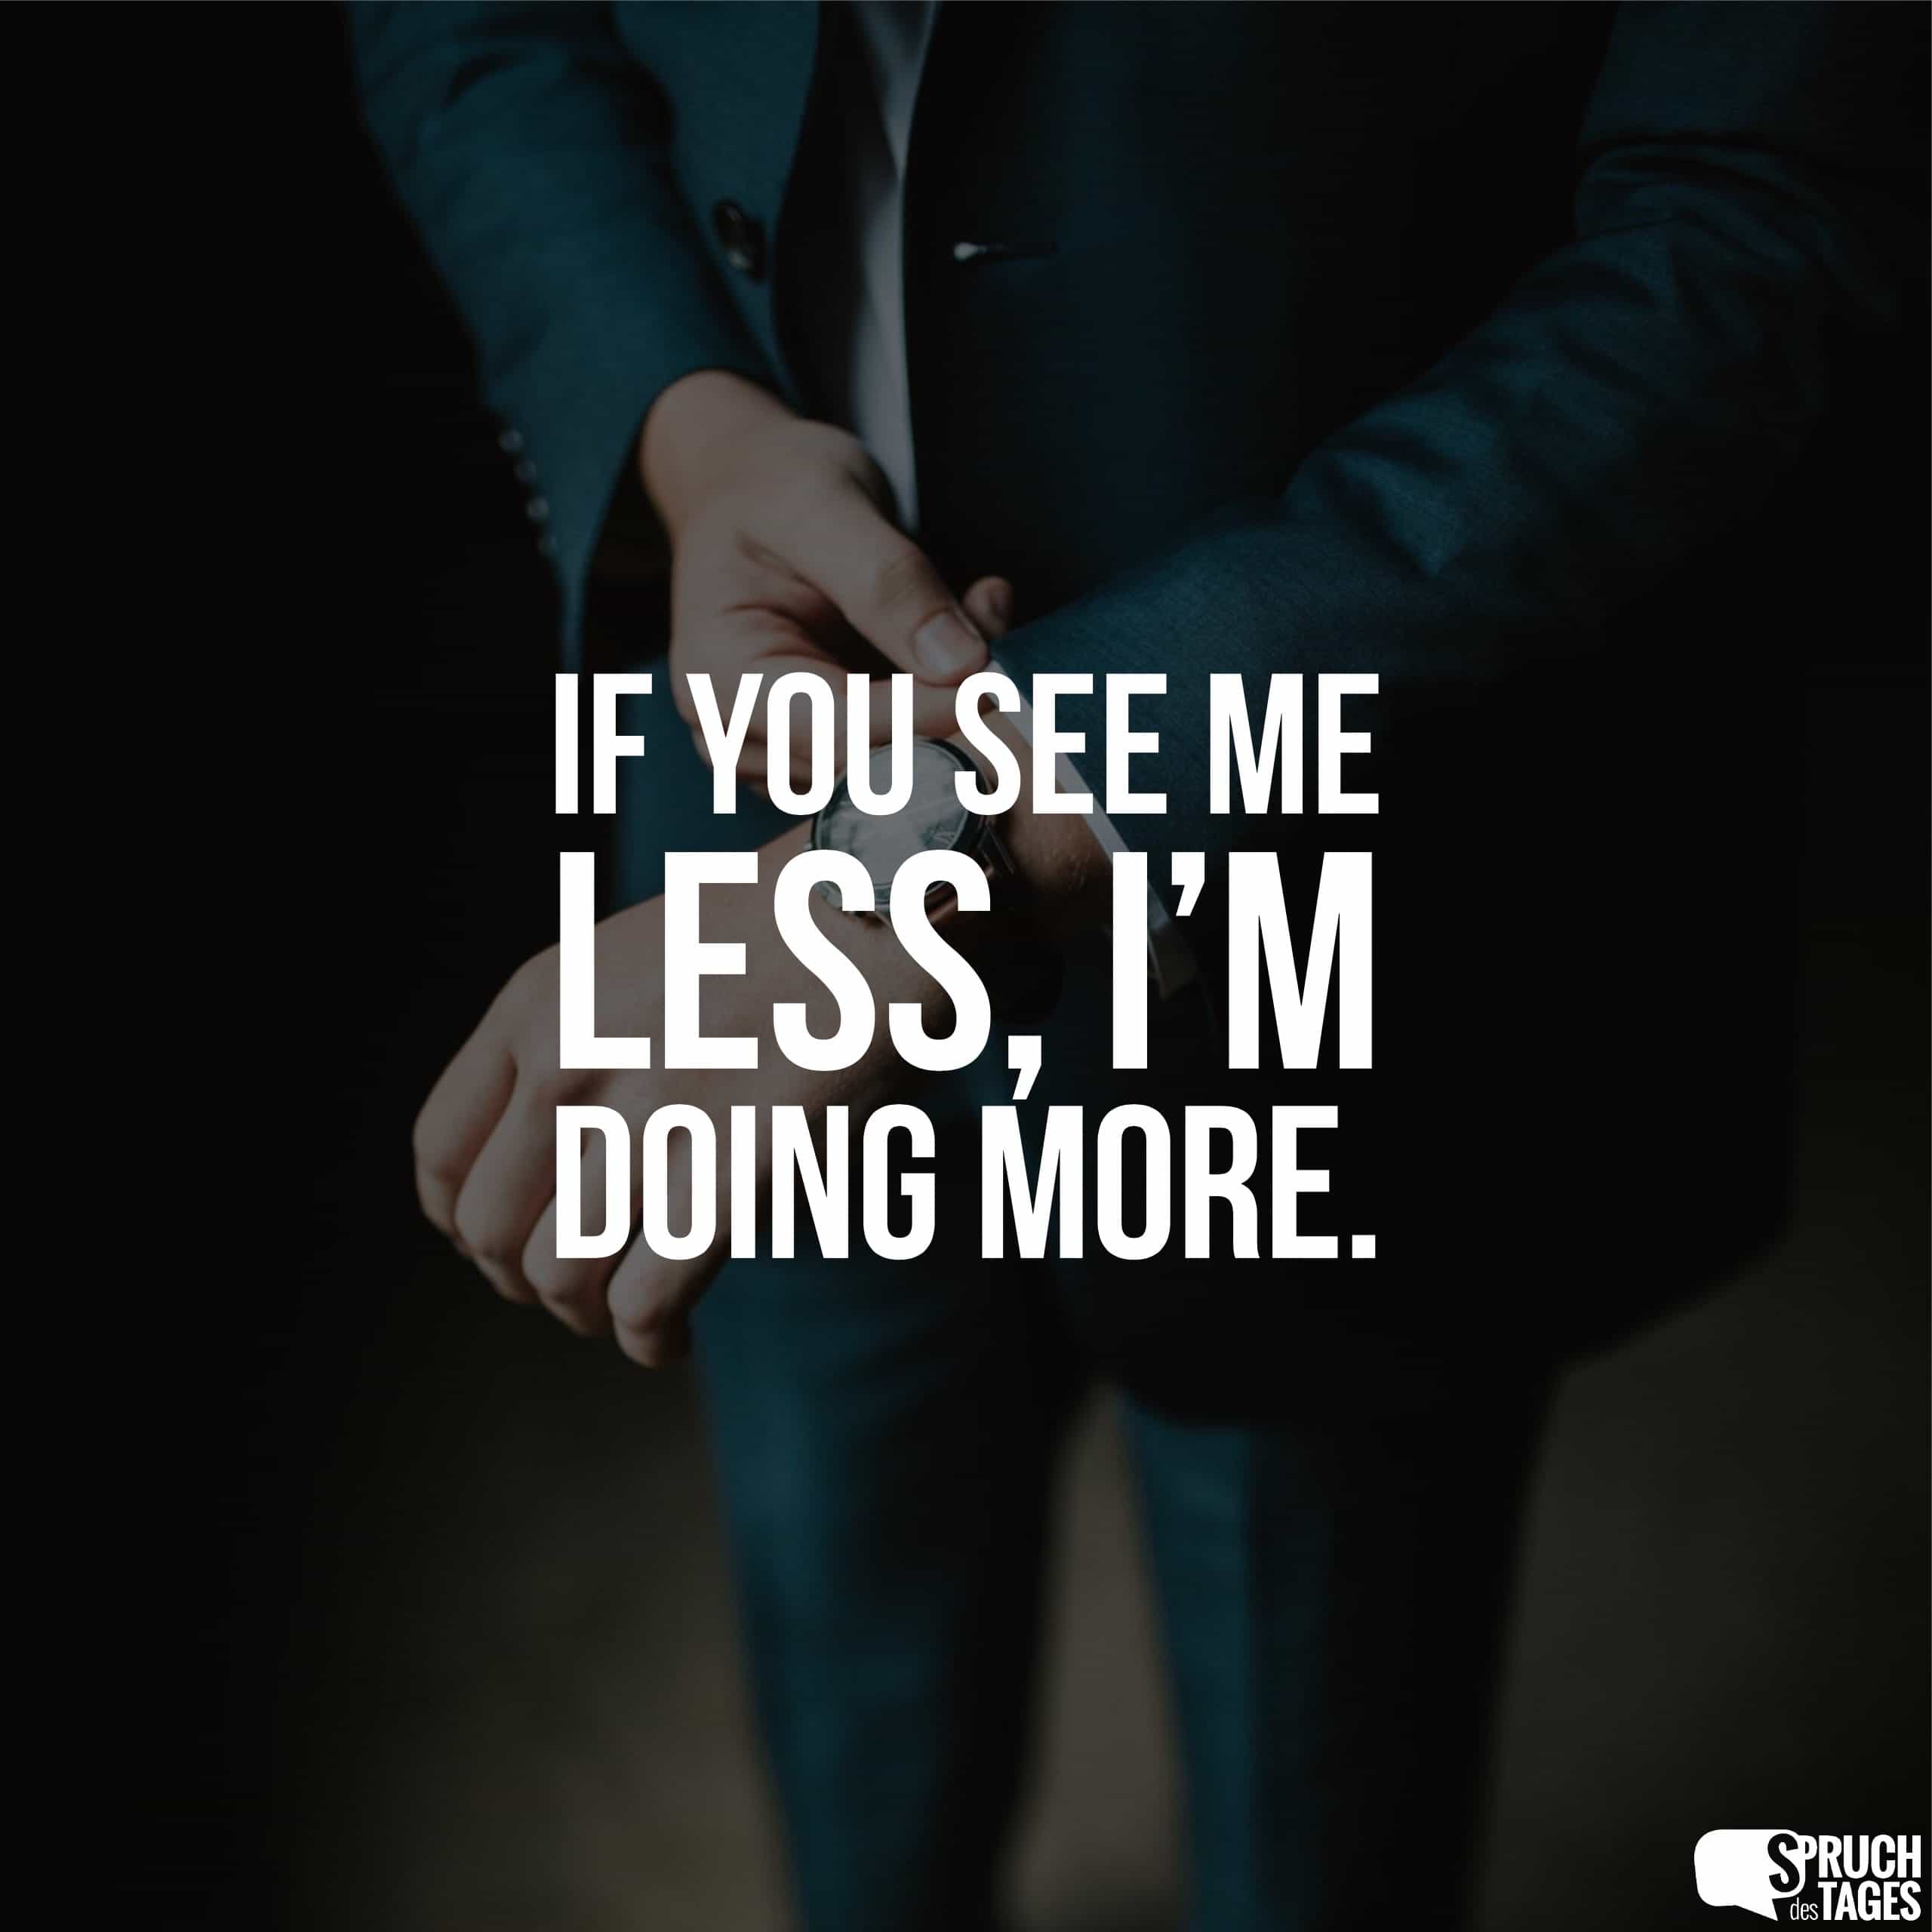 If you see me less, I’m doing more.